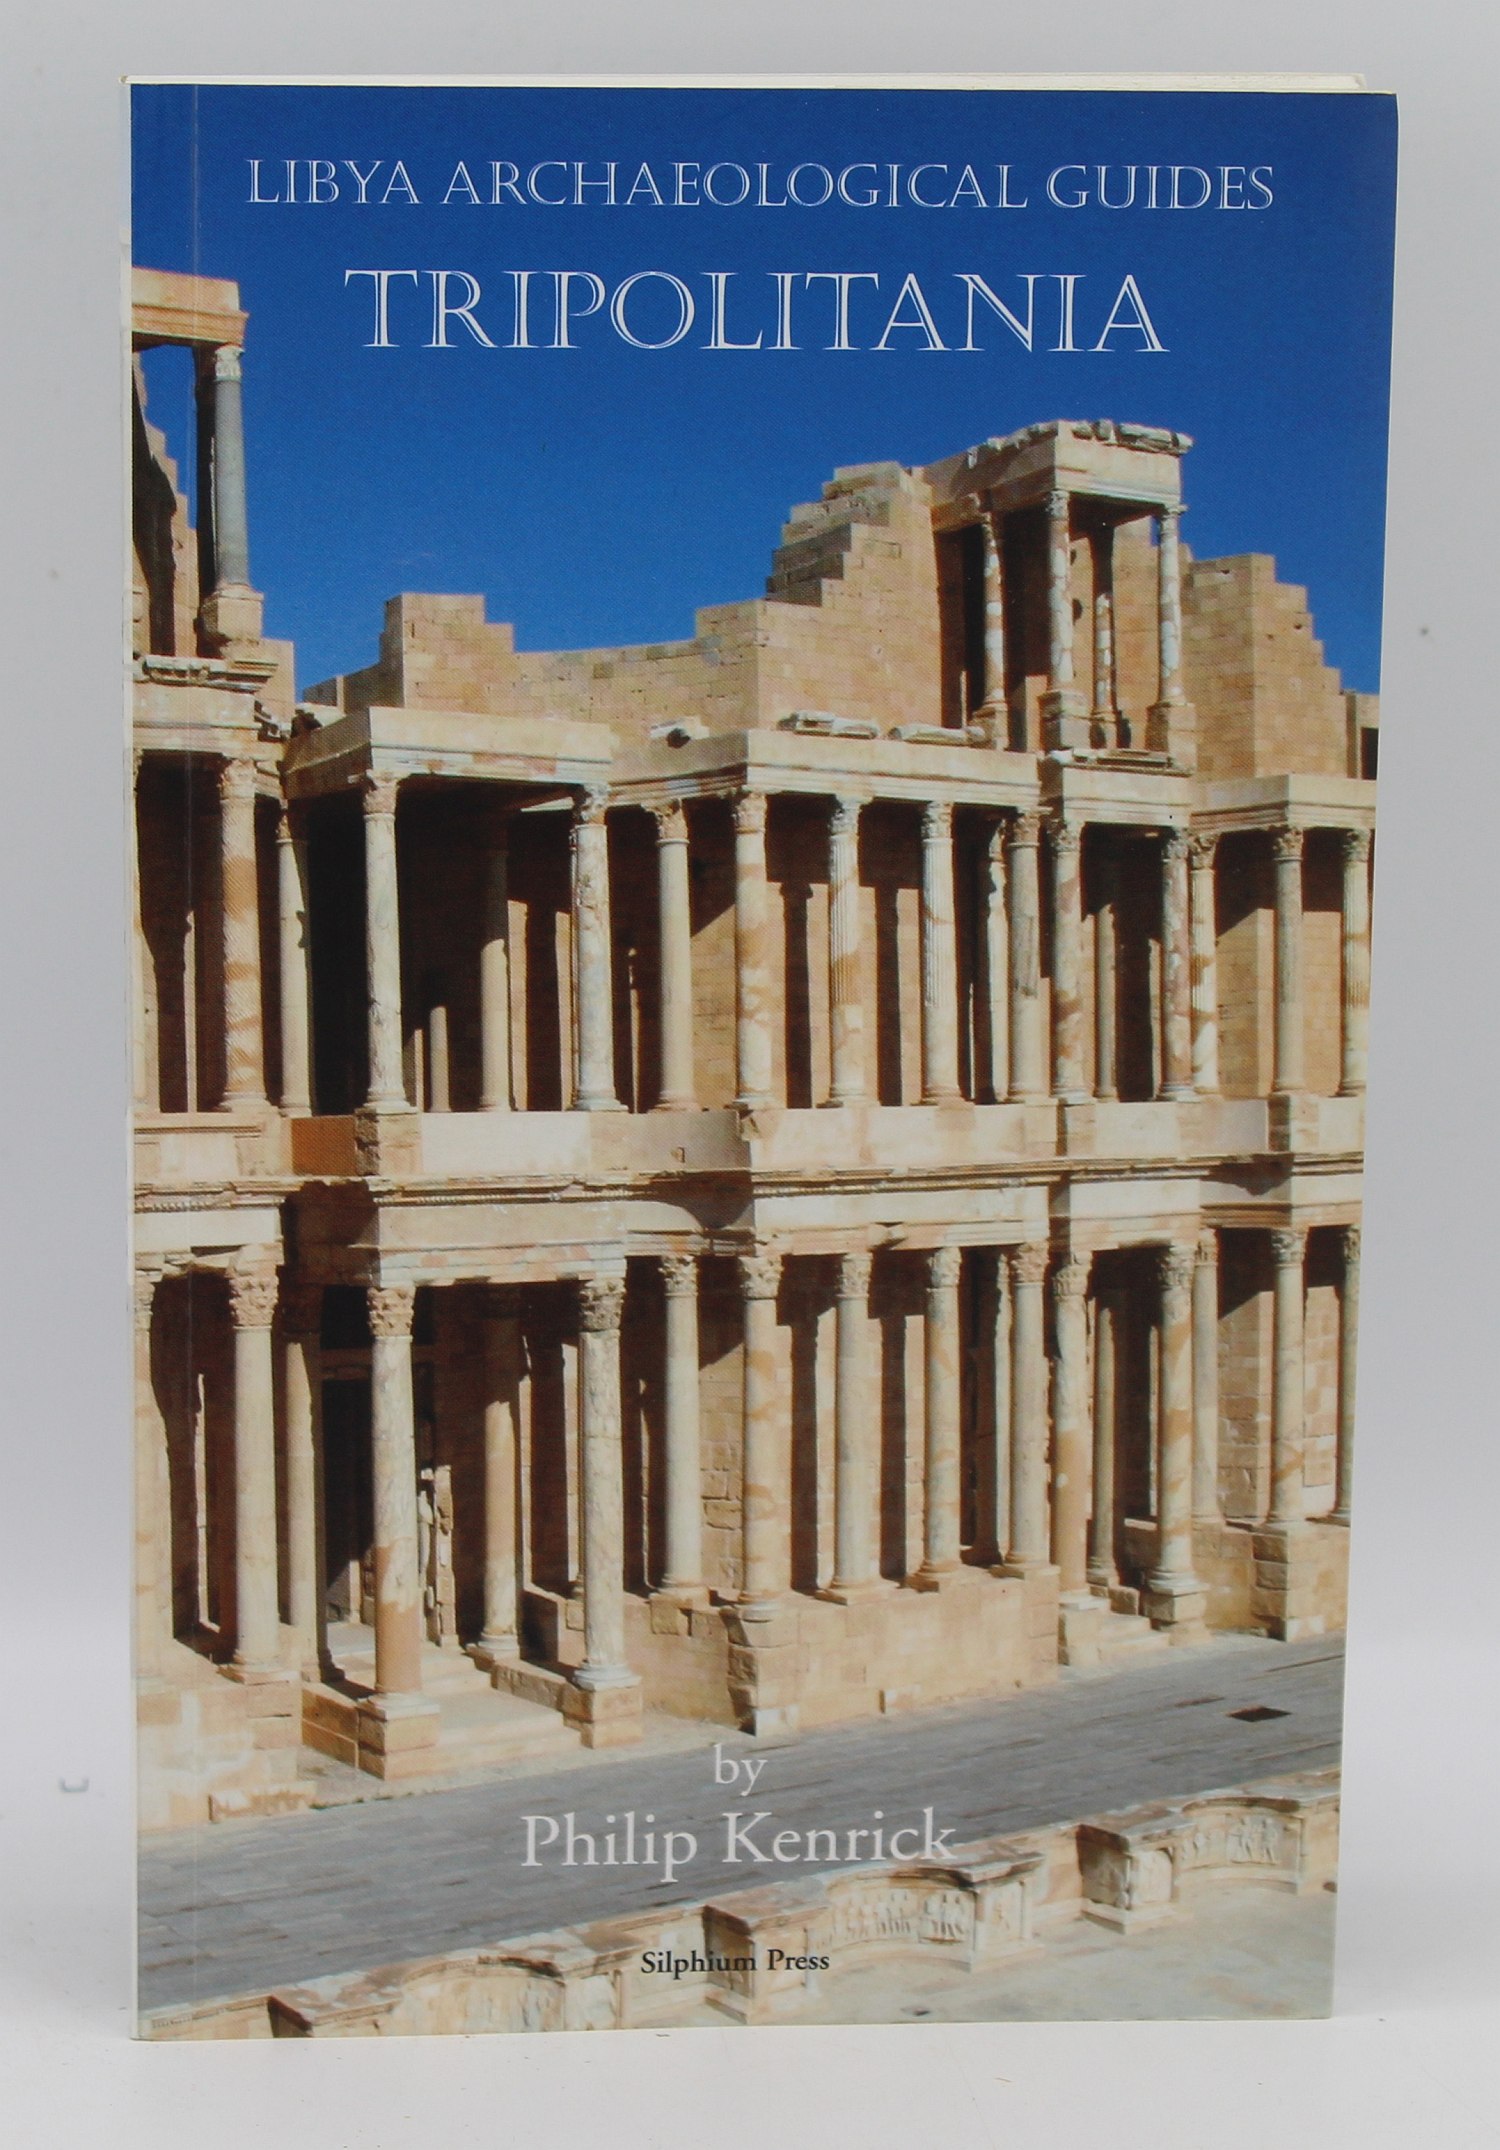 Image for Tripolitania (Libya Archaeological Guides)